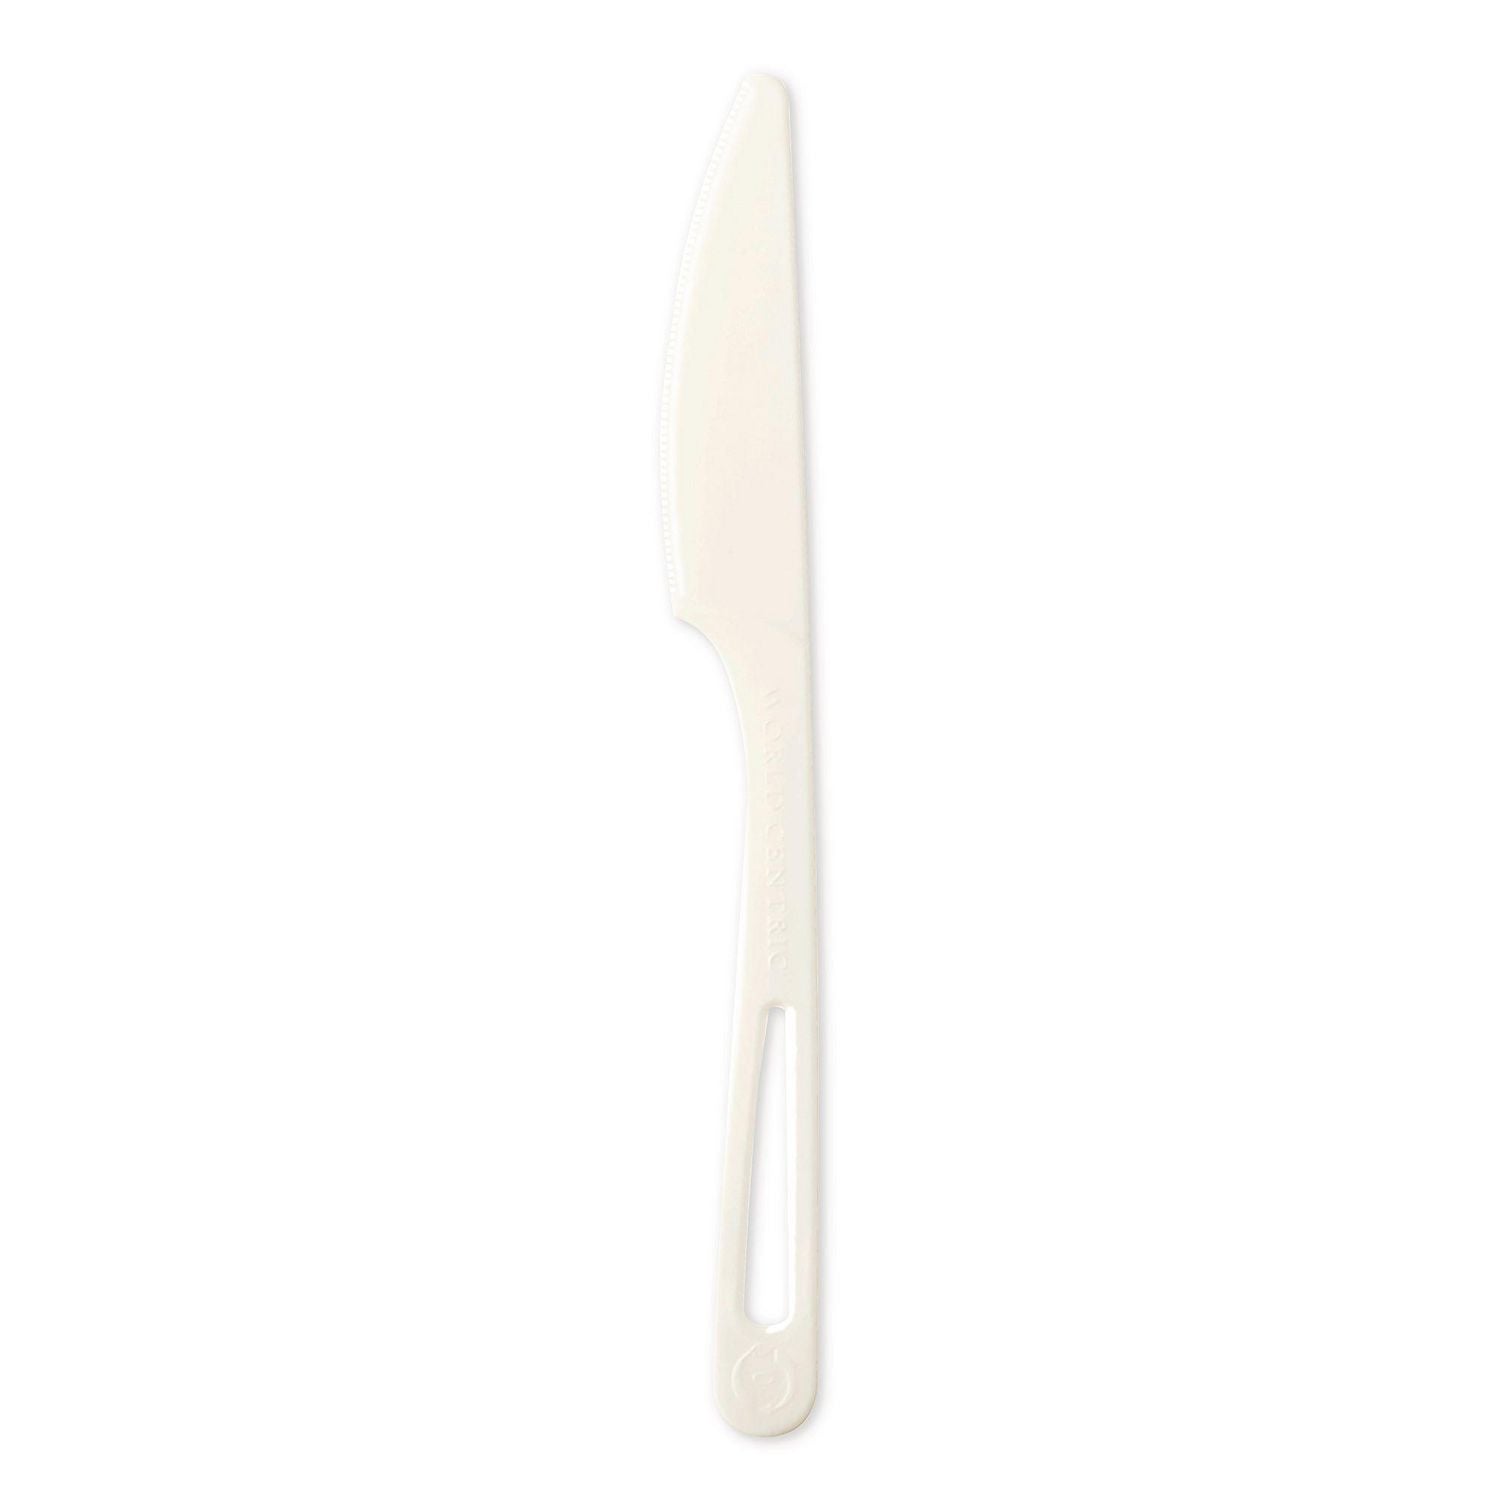 tpla-compostable-cutlery-knife-67-white-1000-carton_worknps6 - 1